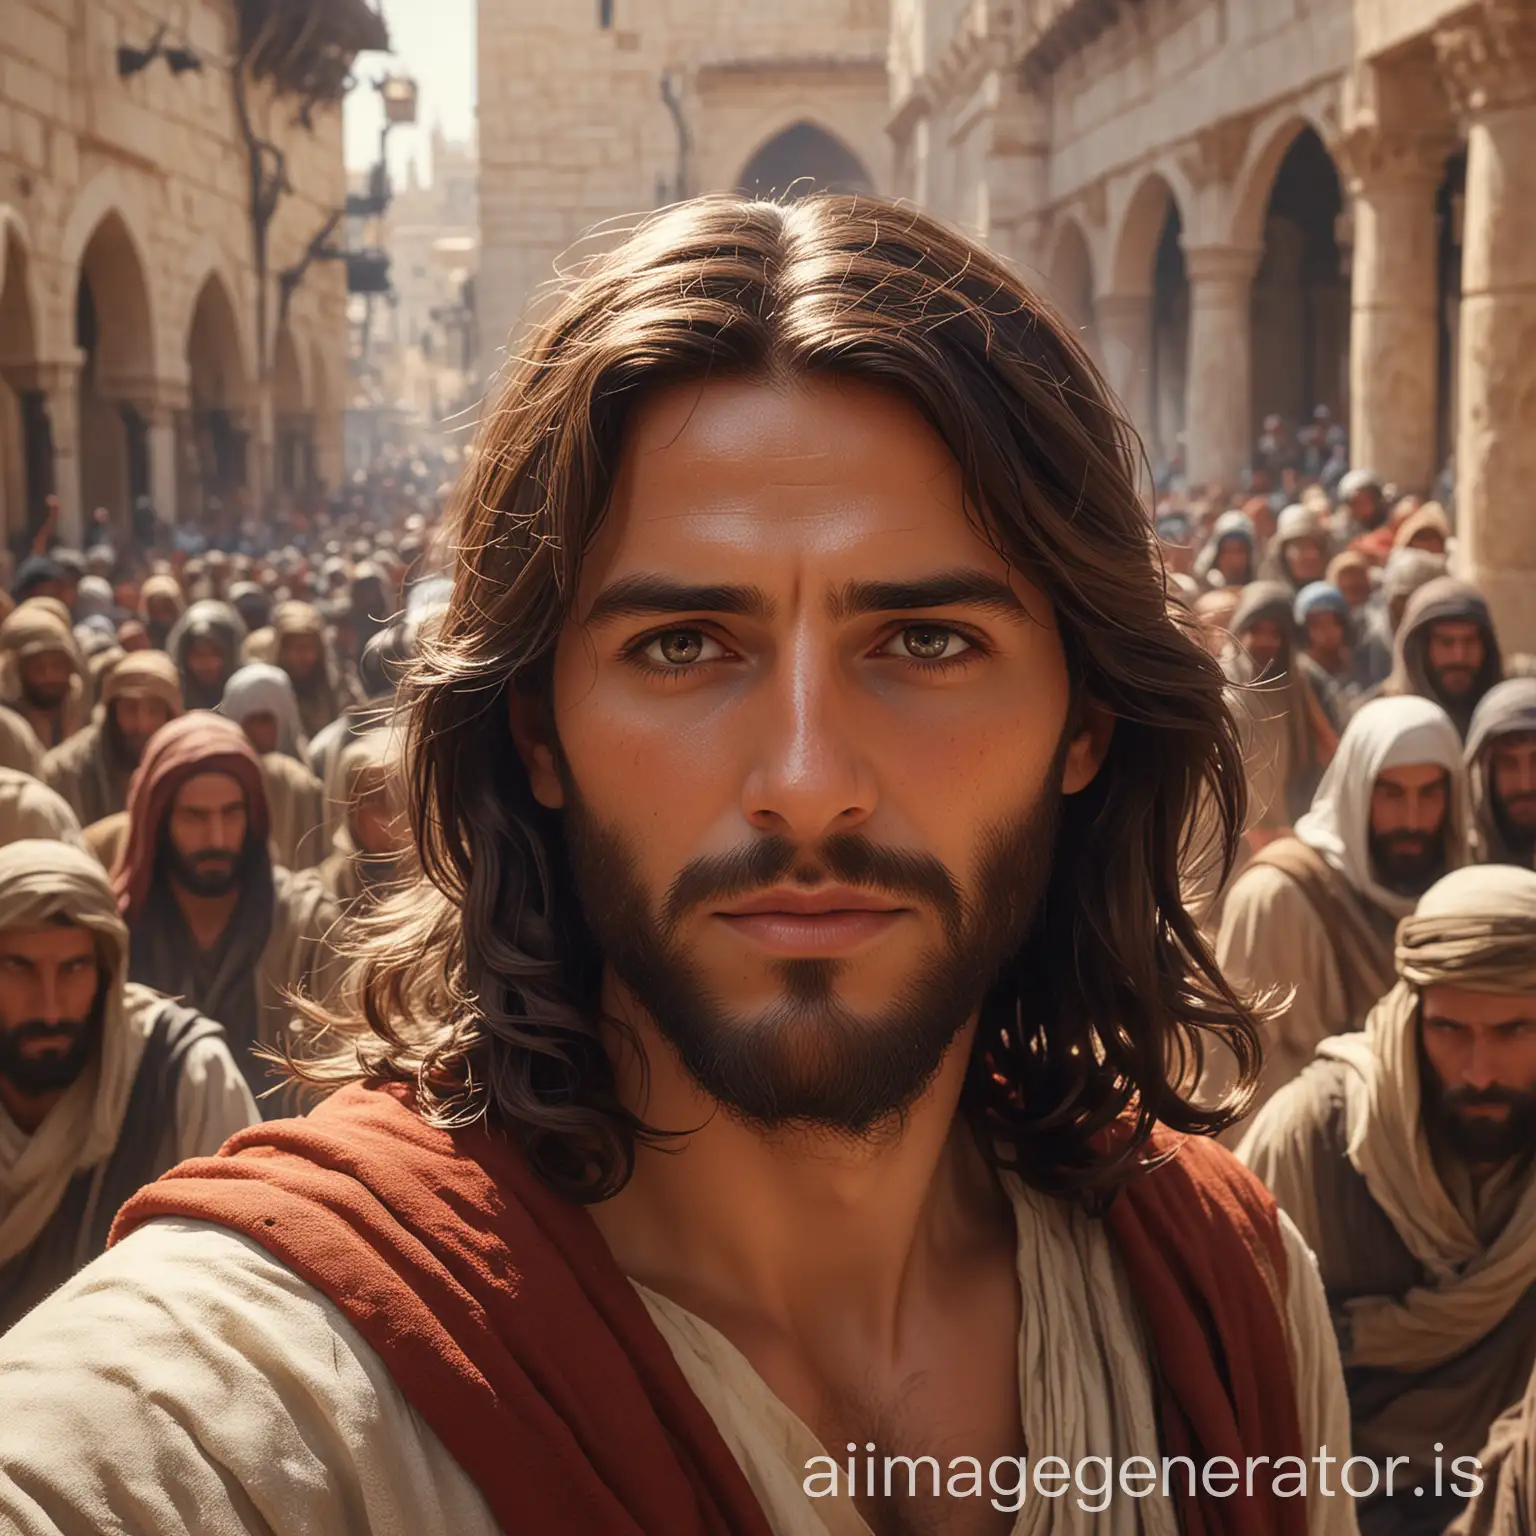 Epic-Fantasy-Art-Closeup-of-Jesus-on-Temple-Mount-Surrounded-by-People